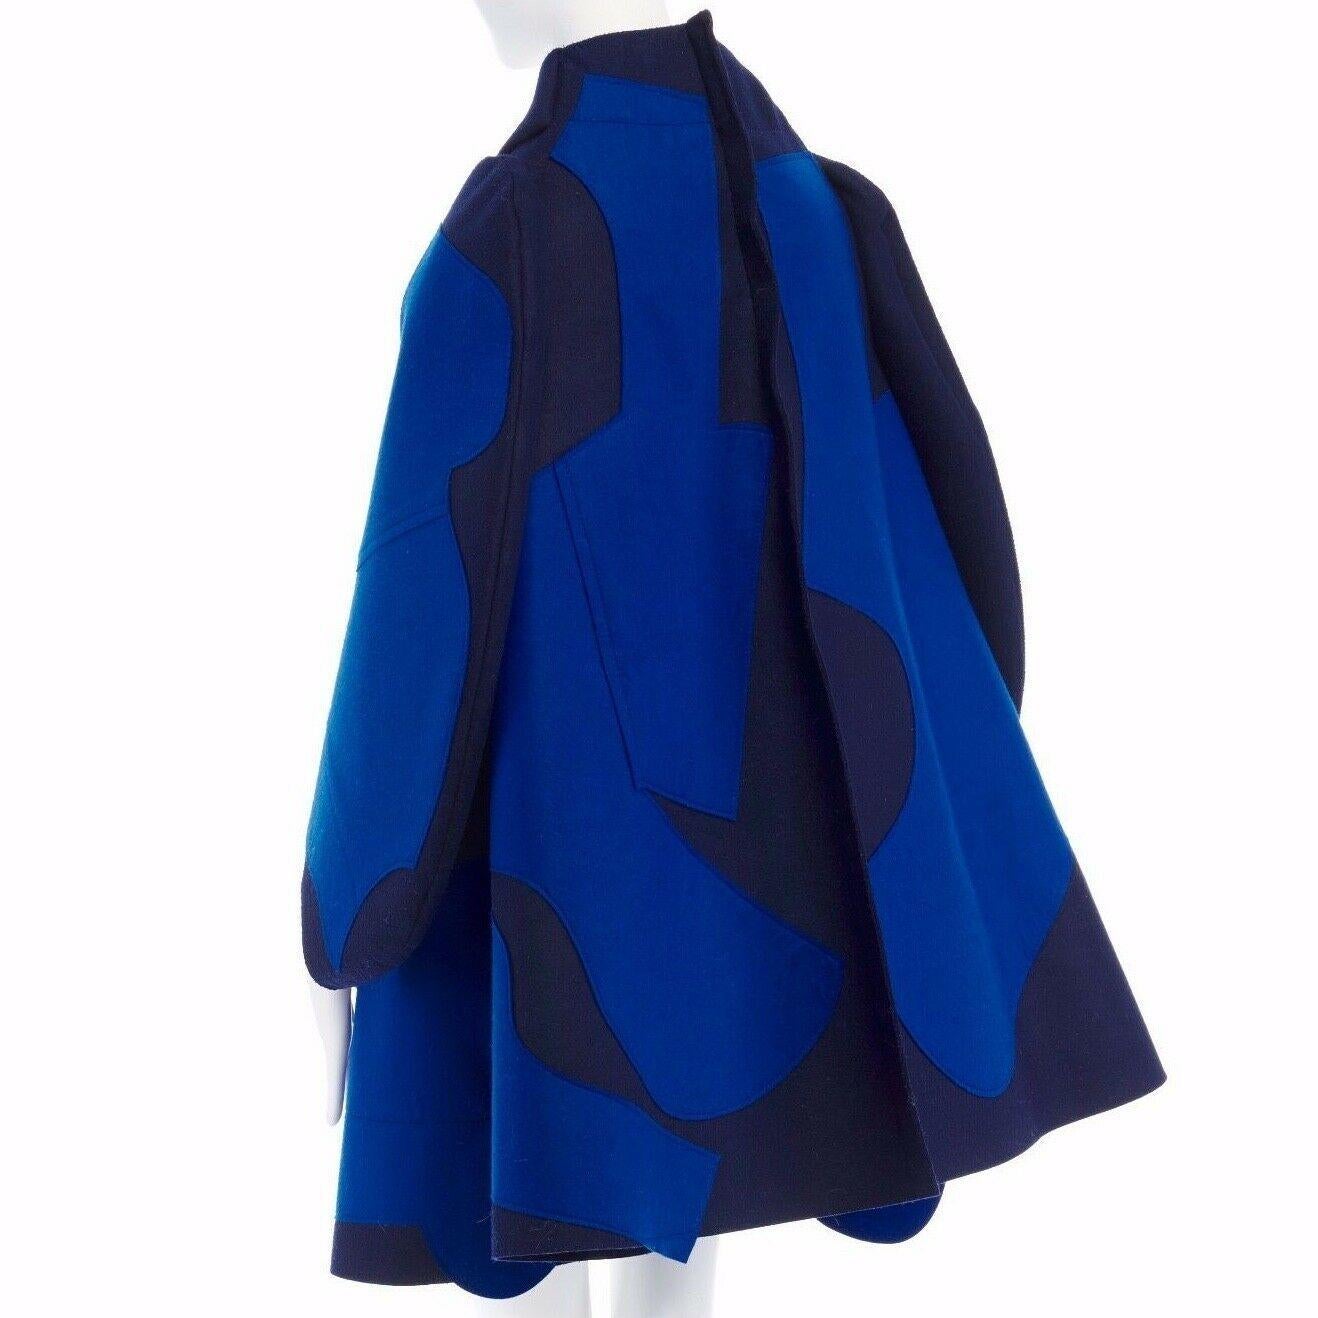 new COMME DES GARCONS AD2012 flatpacked 2D blue abstract shape wool felt coat XS

COMME DES GARCONS
FROM THE FALL WINTER 2012 COLLECTION
Nylon, cotton, wool . Navy base with cobalt blue abstract shape stitched overlay . Flat packed design . Stiff